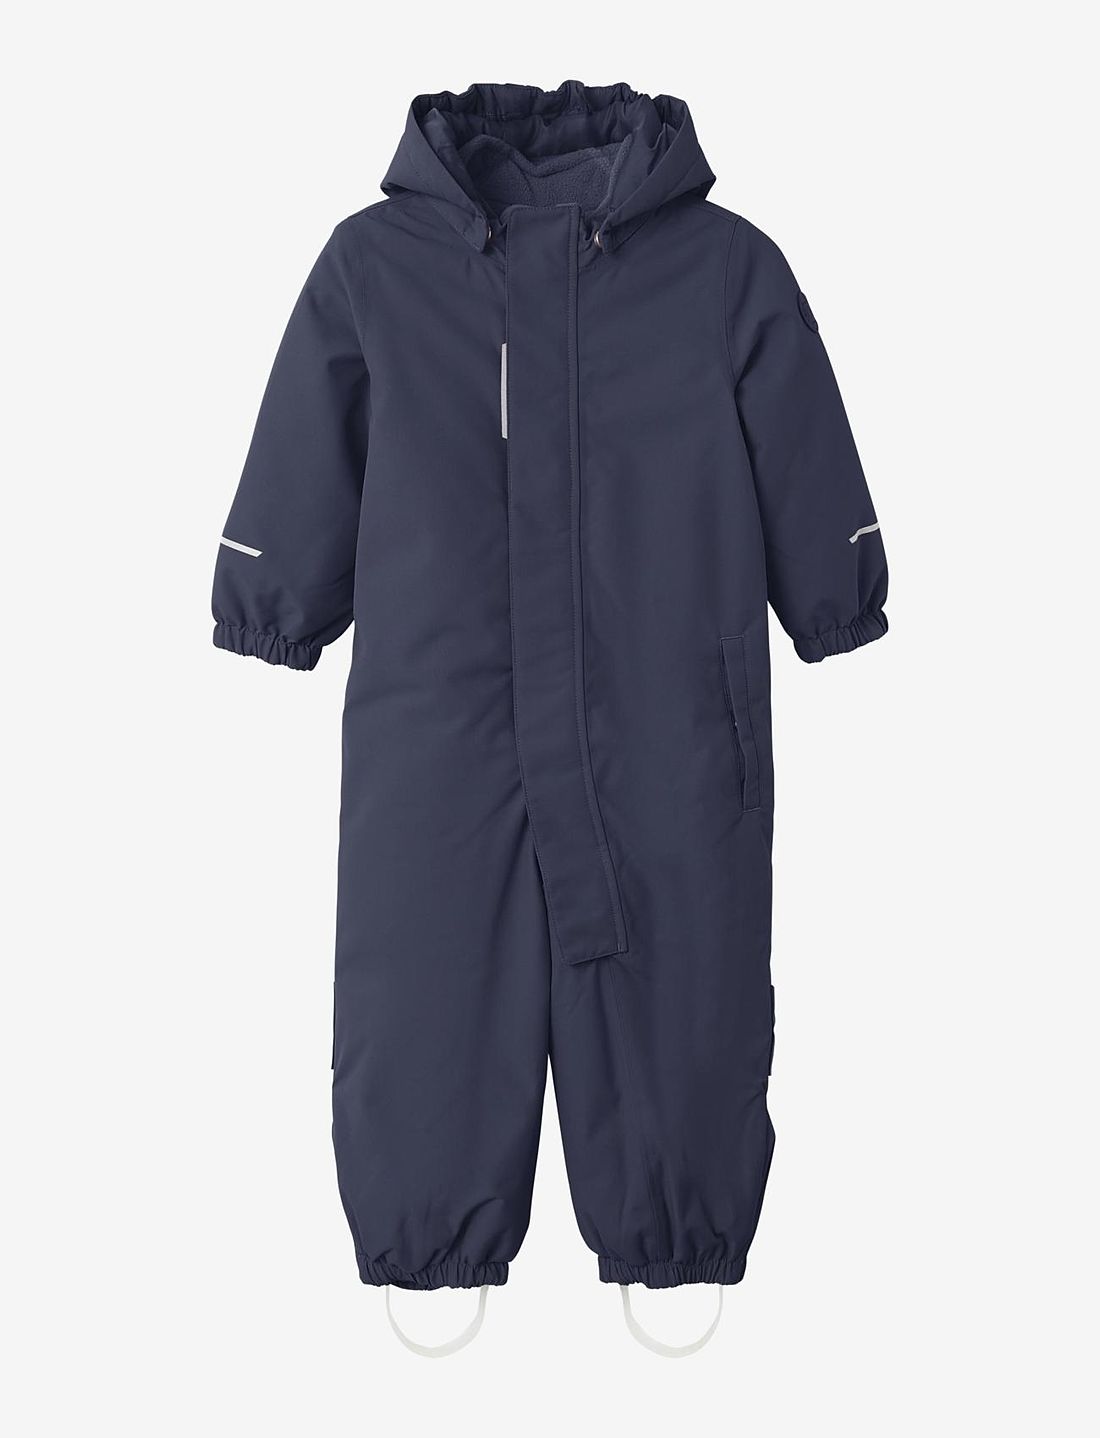 name it Nmnsnow10 Suit Solid 1fo Noos - 50.00 €. Buy Coveralls from name it  online at Boozt.com. Fast delivery and easy returns